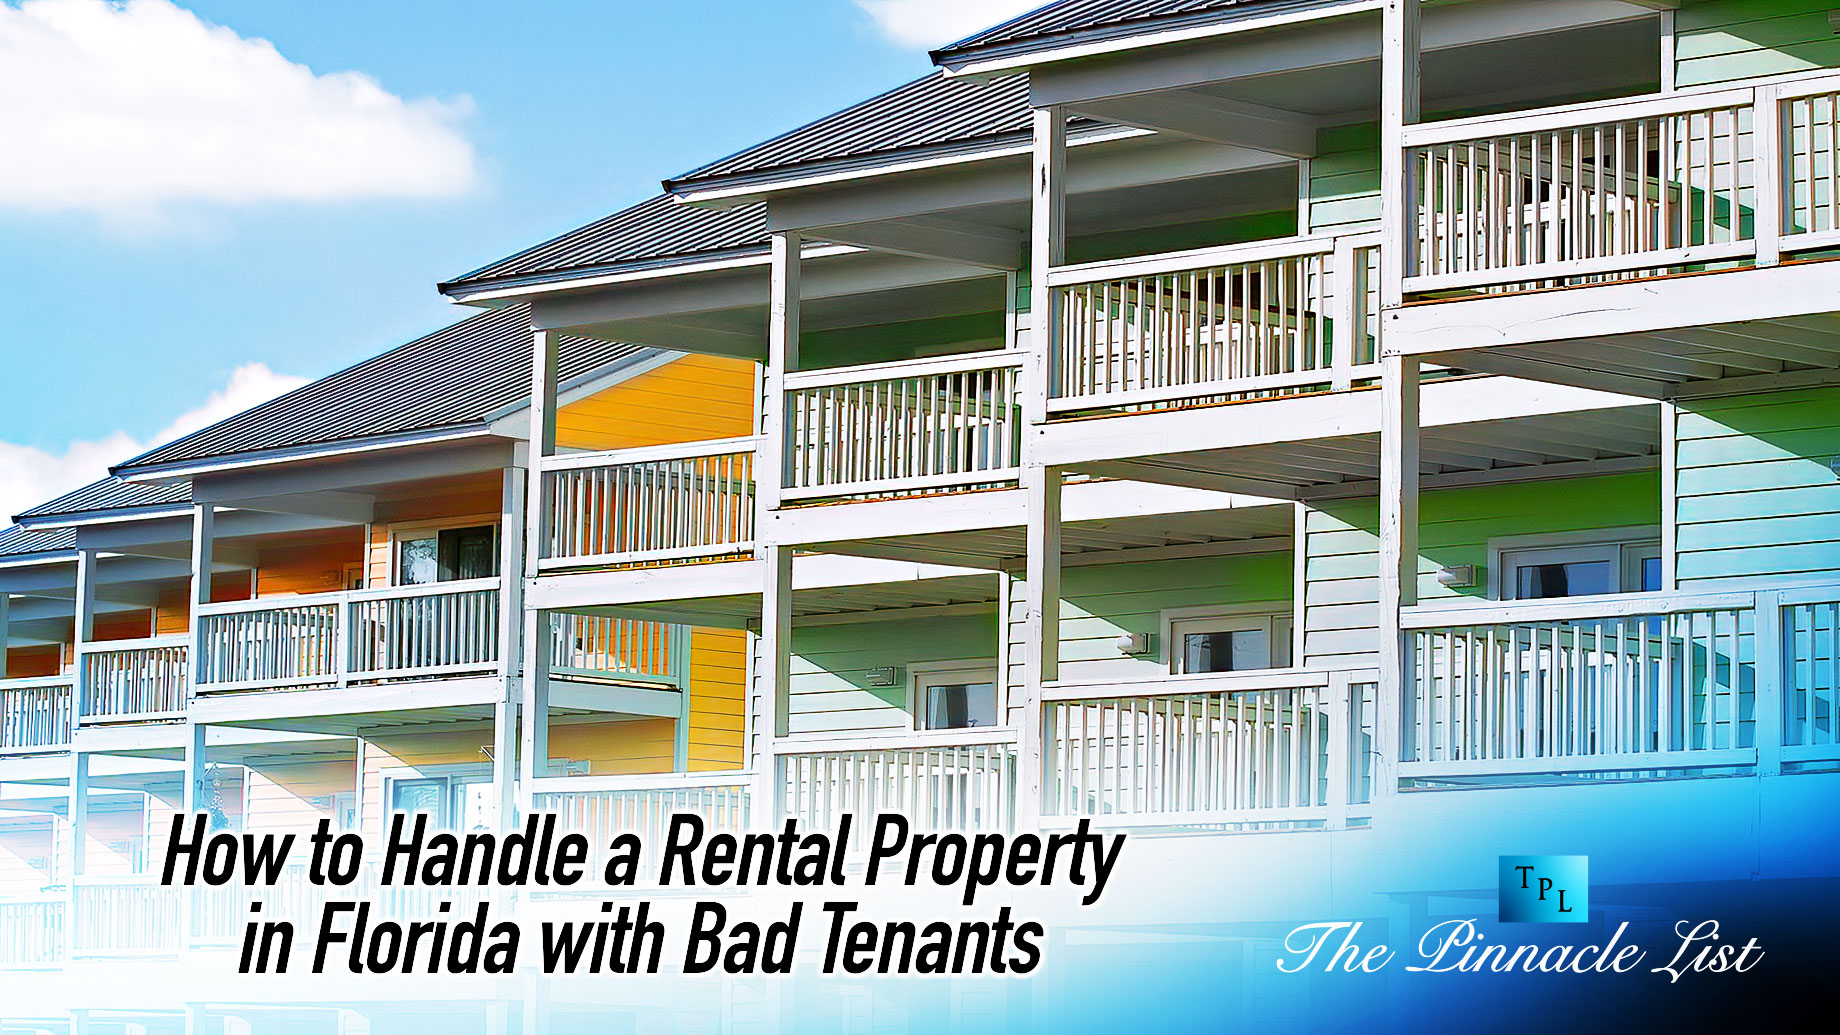 How to Handle a Rental Property in Florida with Bad Tenants